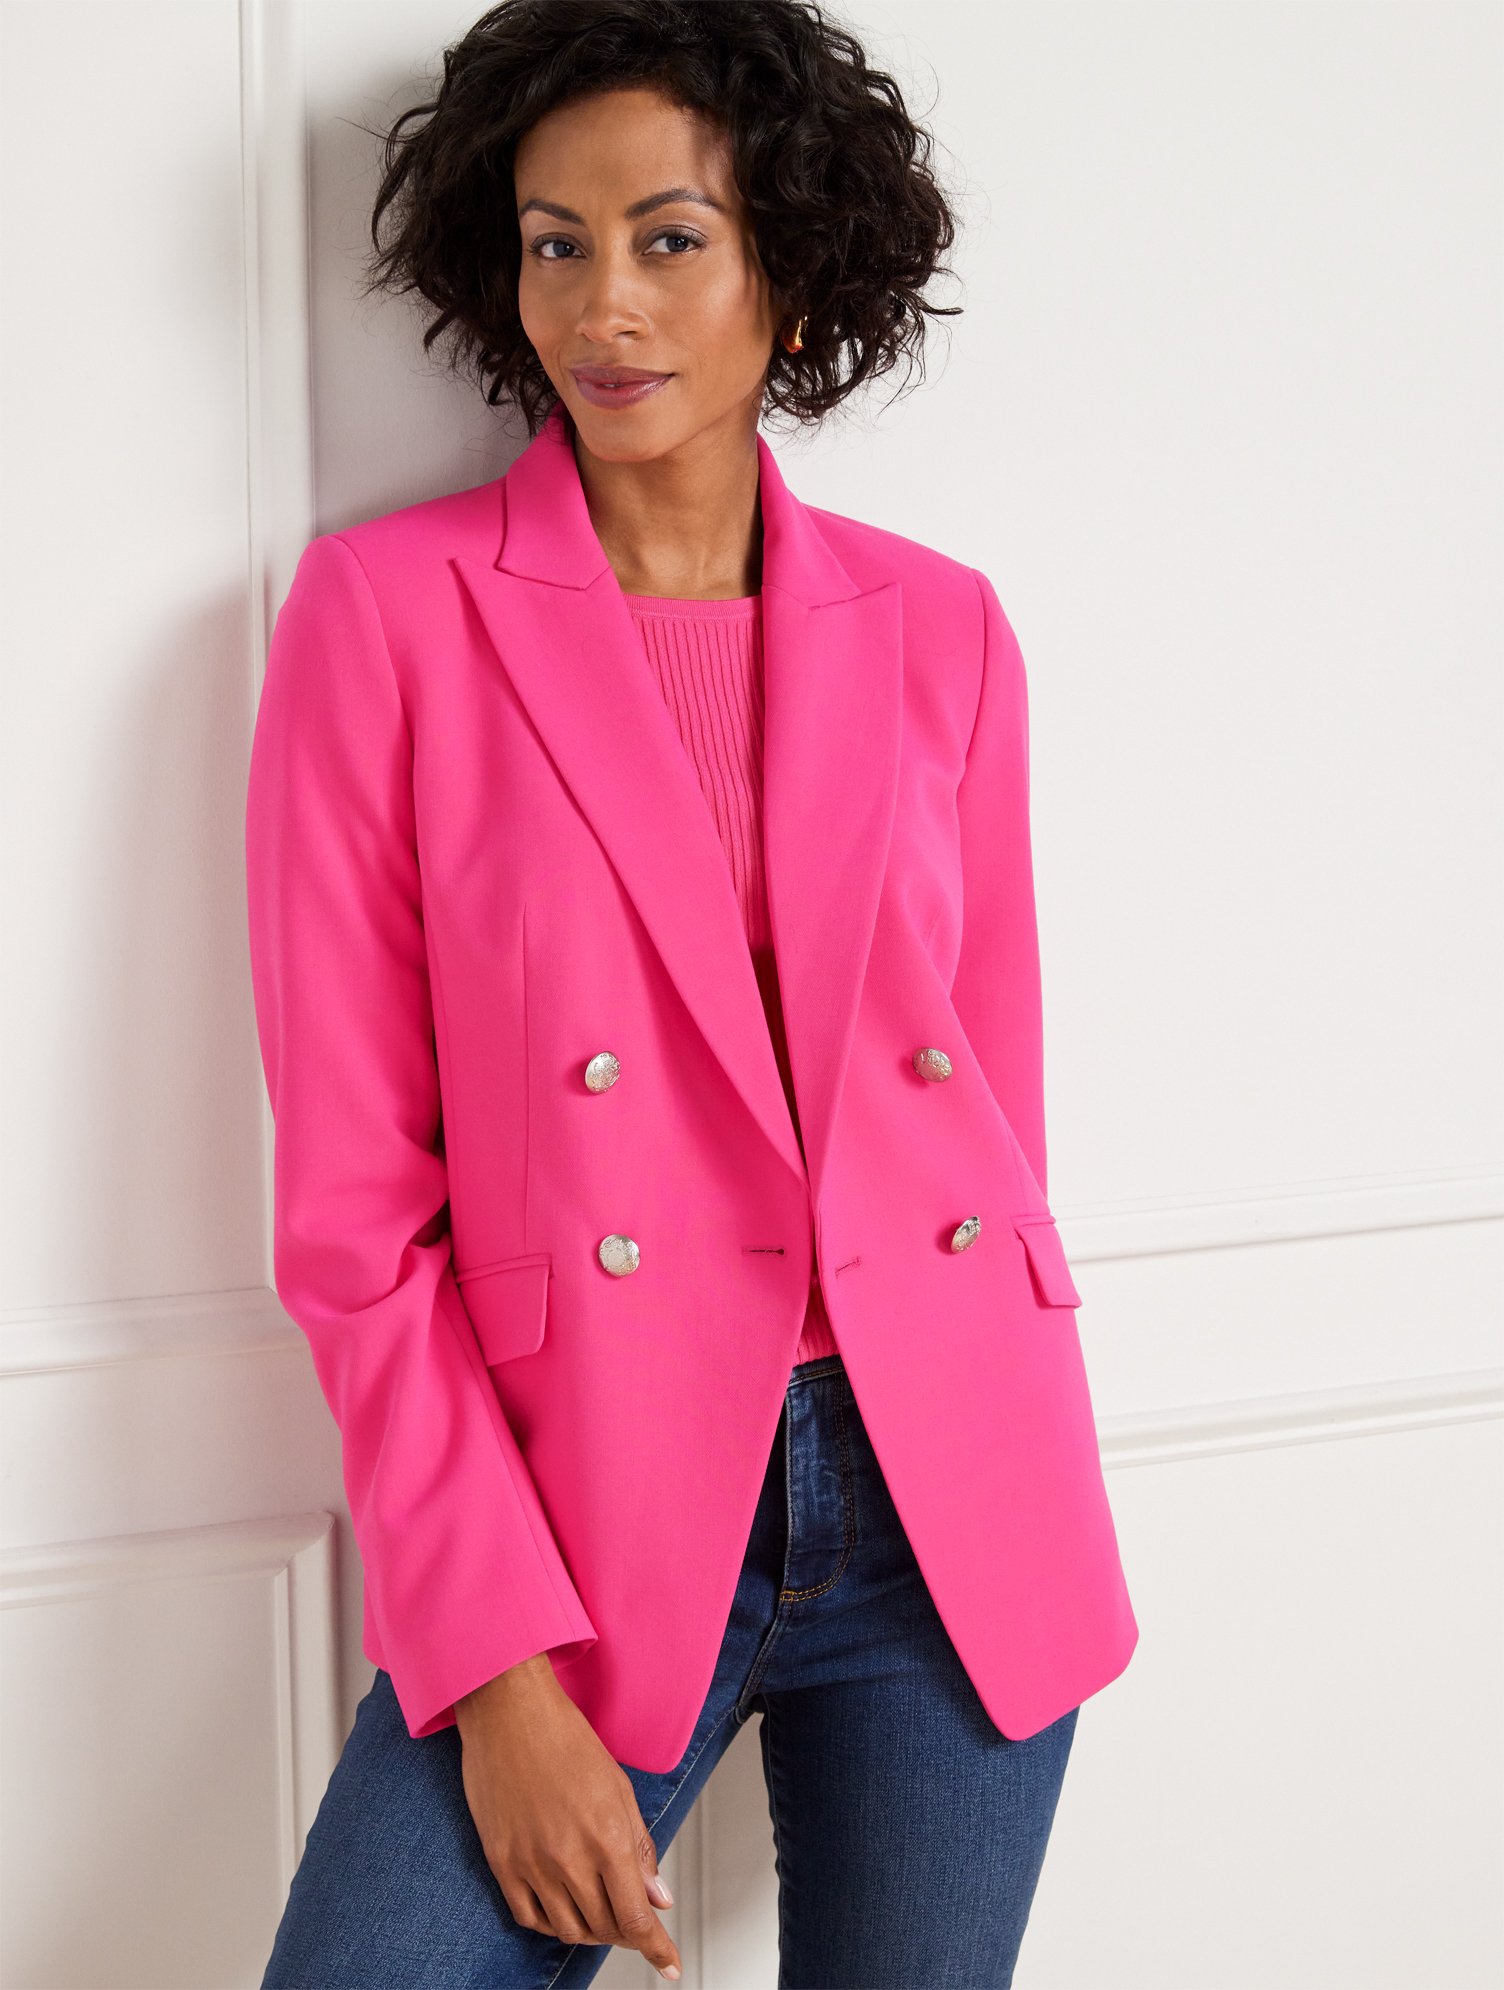 Talbots Tailored Stretch Double Breasted Blazer - Vivid Pink - 18